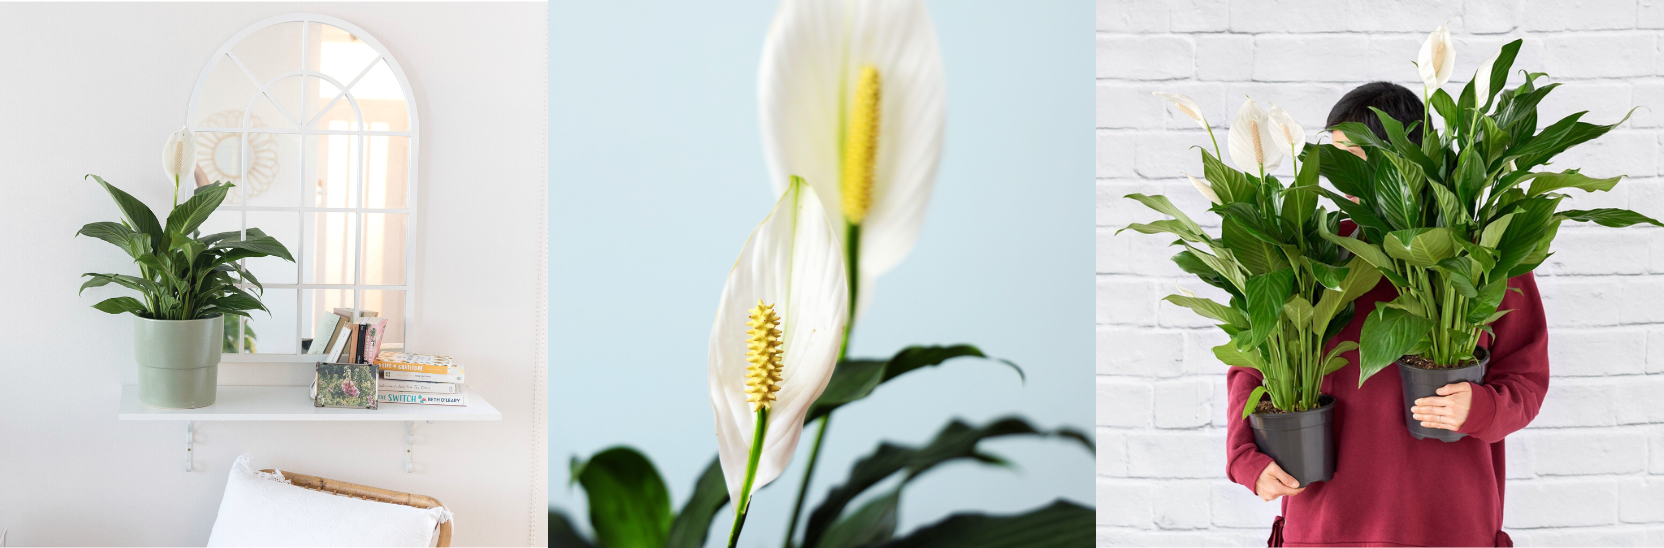 20 Fast Growing Plants - Peace Lily